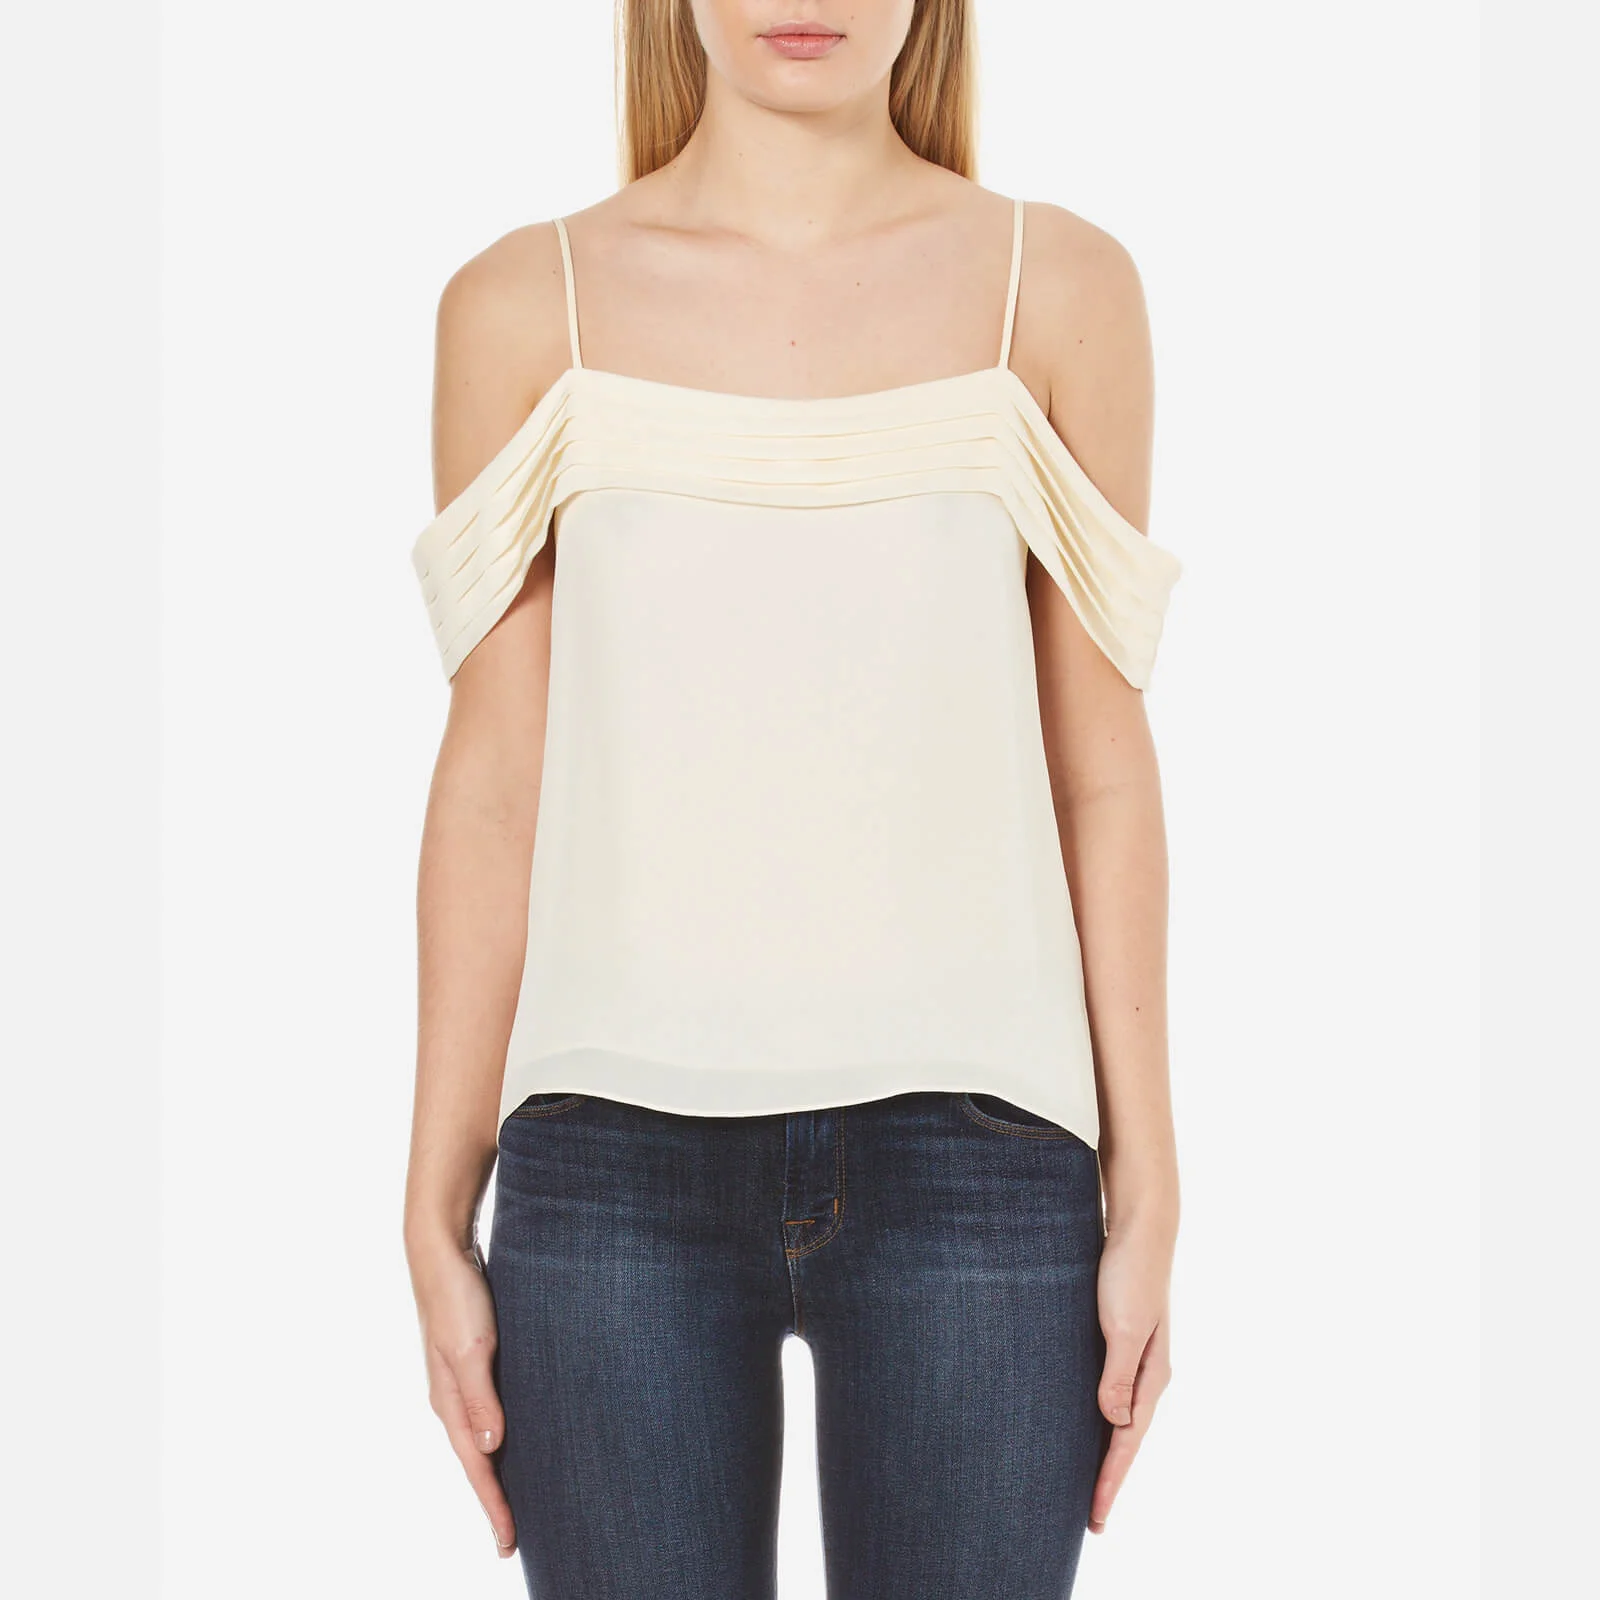 T by Alexander Wang Women's Silk Georgette Pleated Off the Shoulder Top - Eggshell Image 1